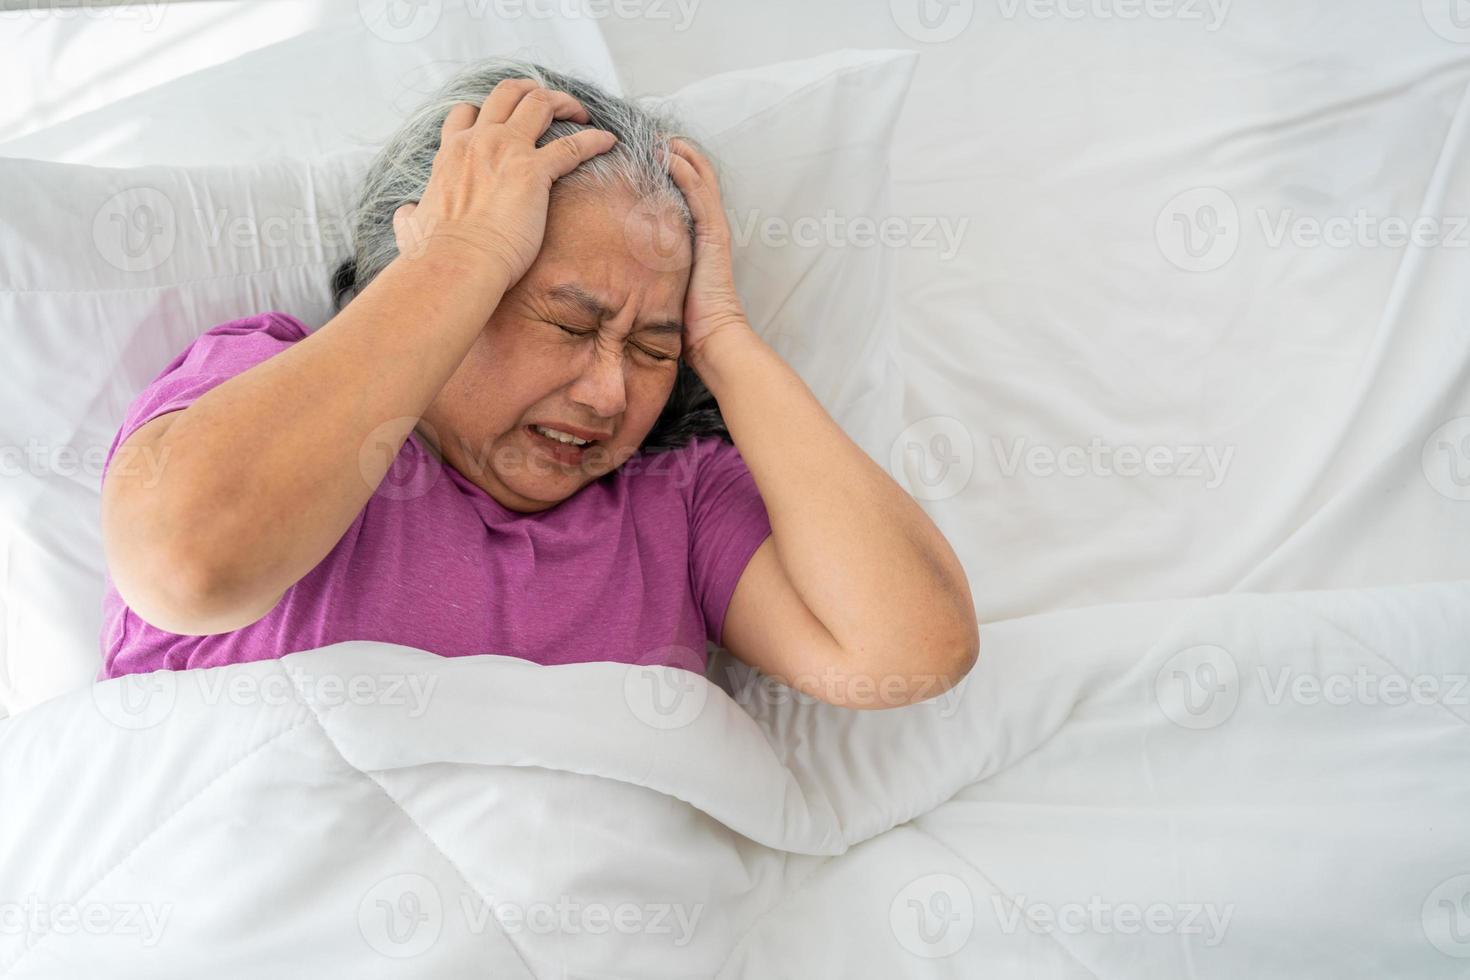 Senior woman with gray hair in bed feel depressed or suffering from strong headache migraine and high blood pressure, insomniac trying to sleep disturbed toss and turn in bedroom photo